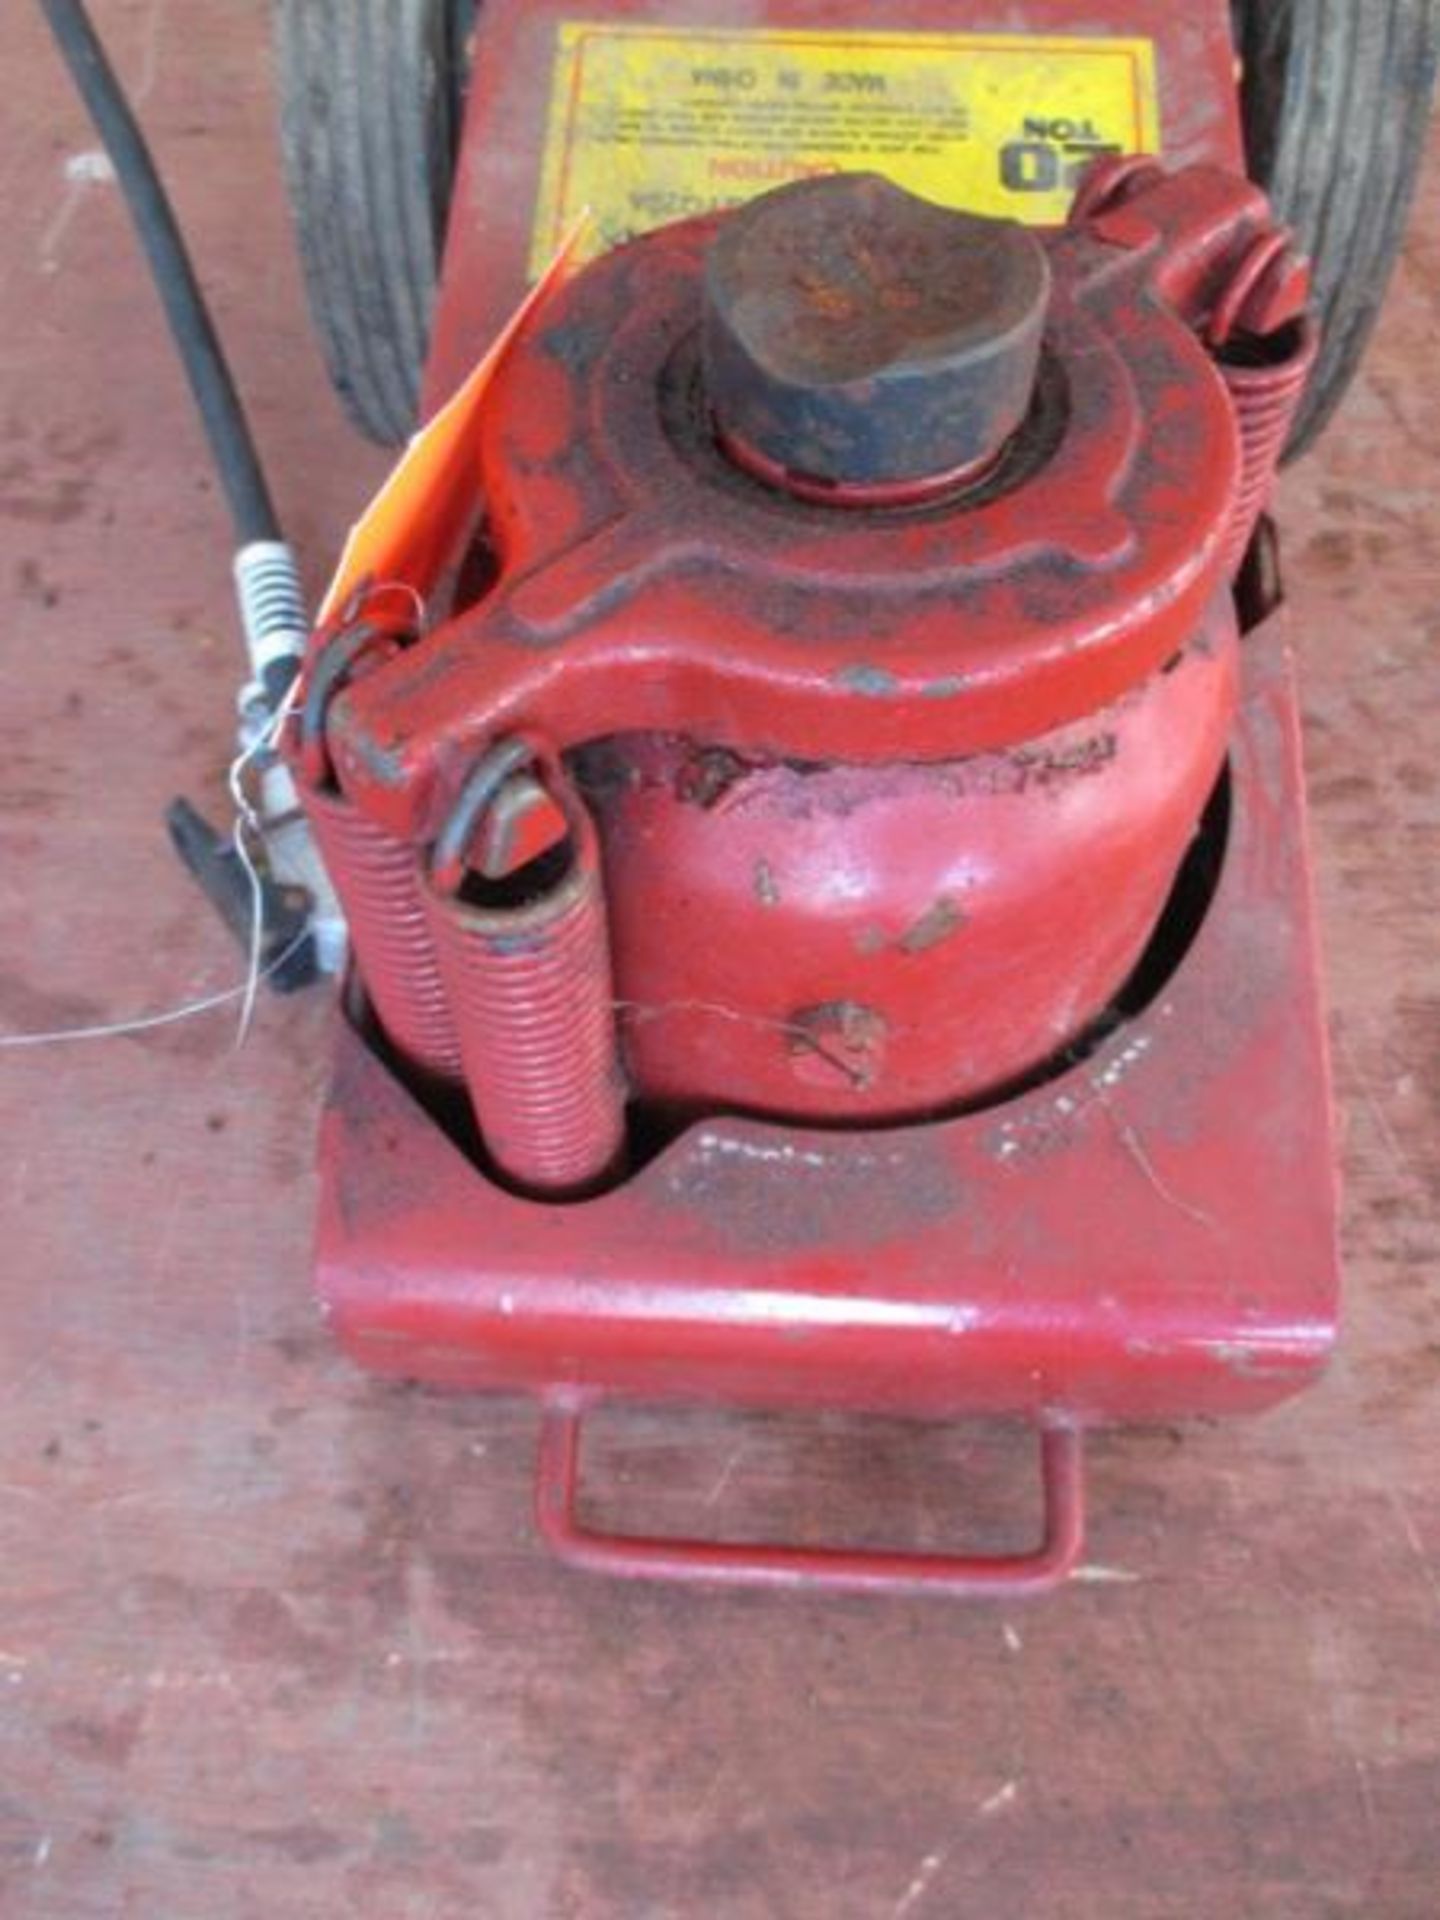 Hydraulic Air Jack, Model: QYQ20A, 20 Ton, Missing Handle Missing Handle - Image 10 of 13